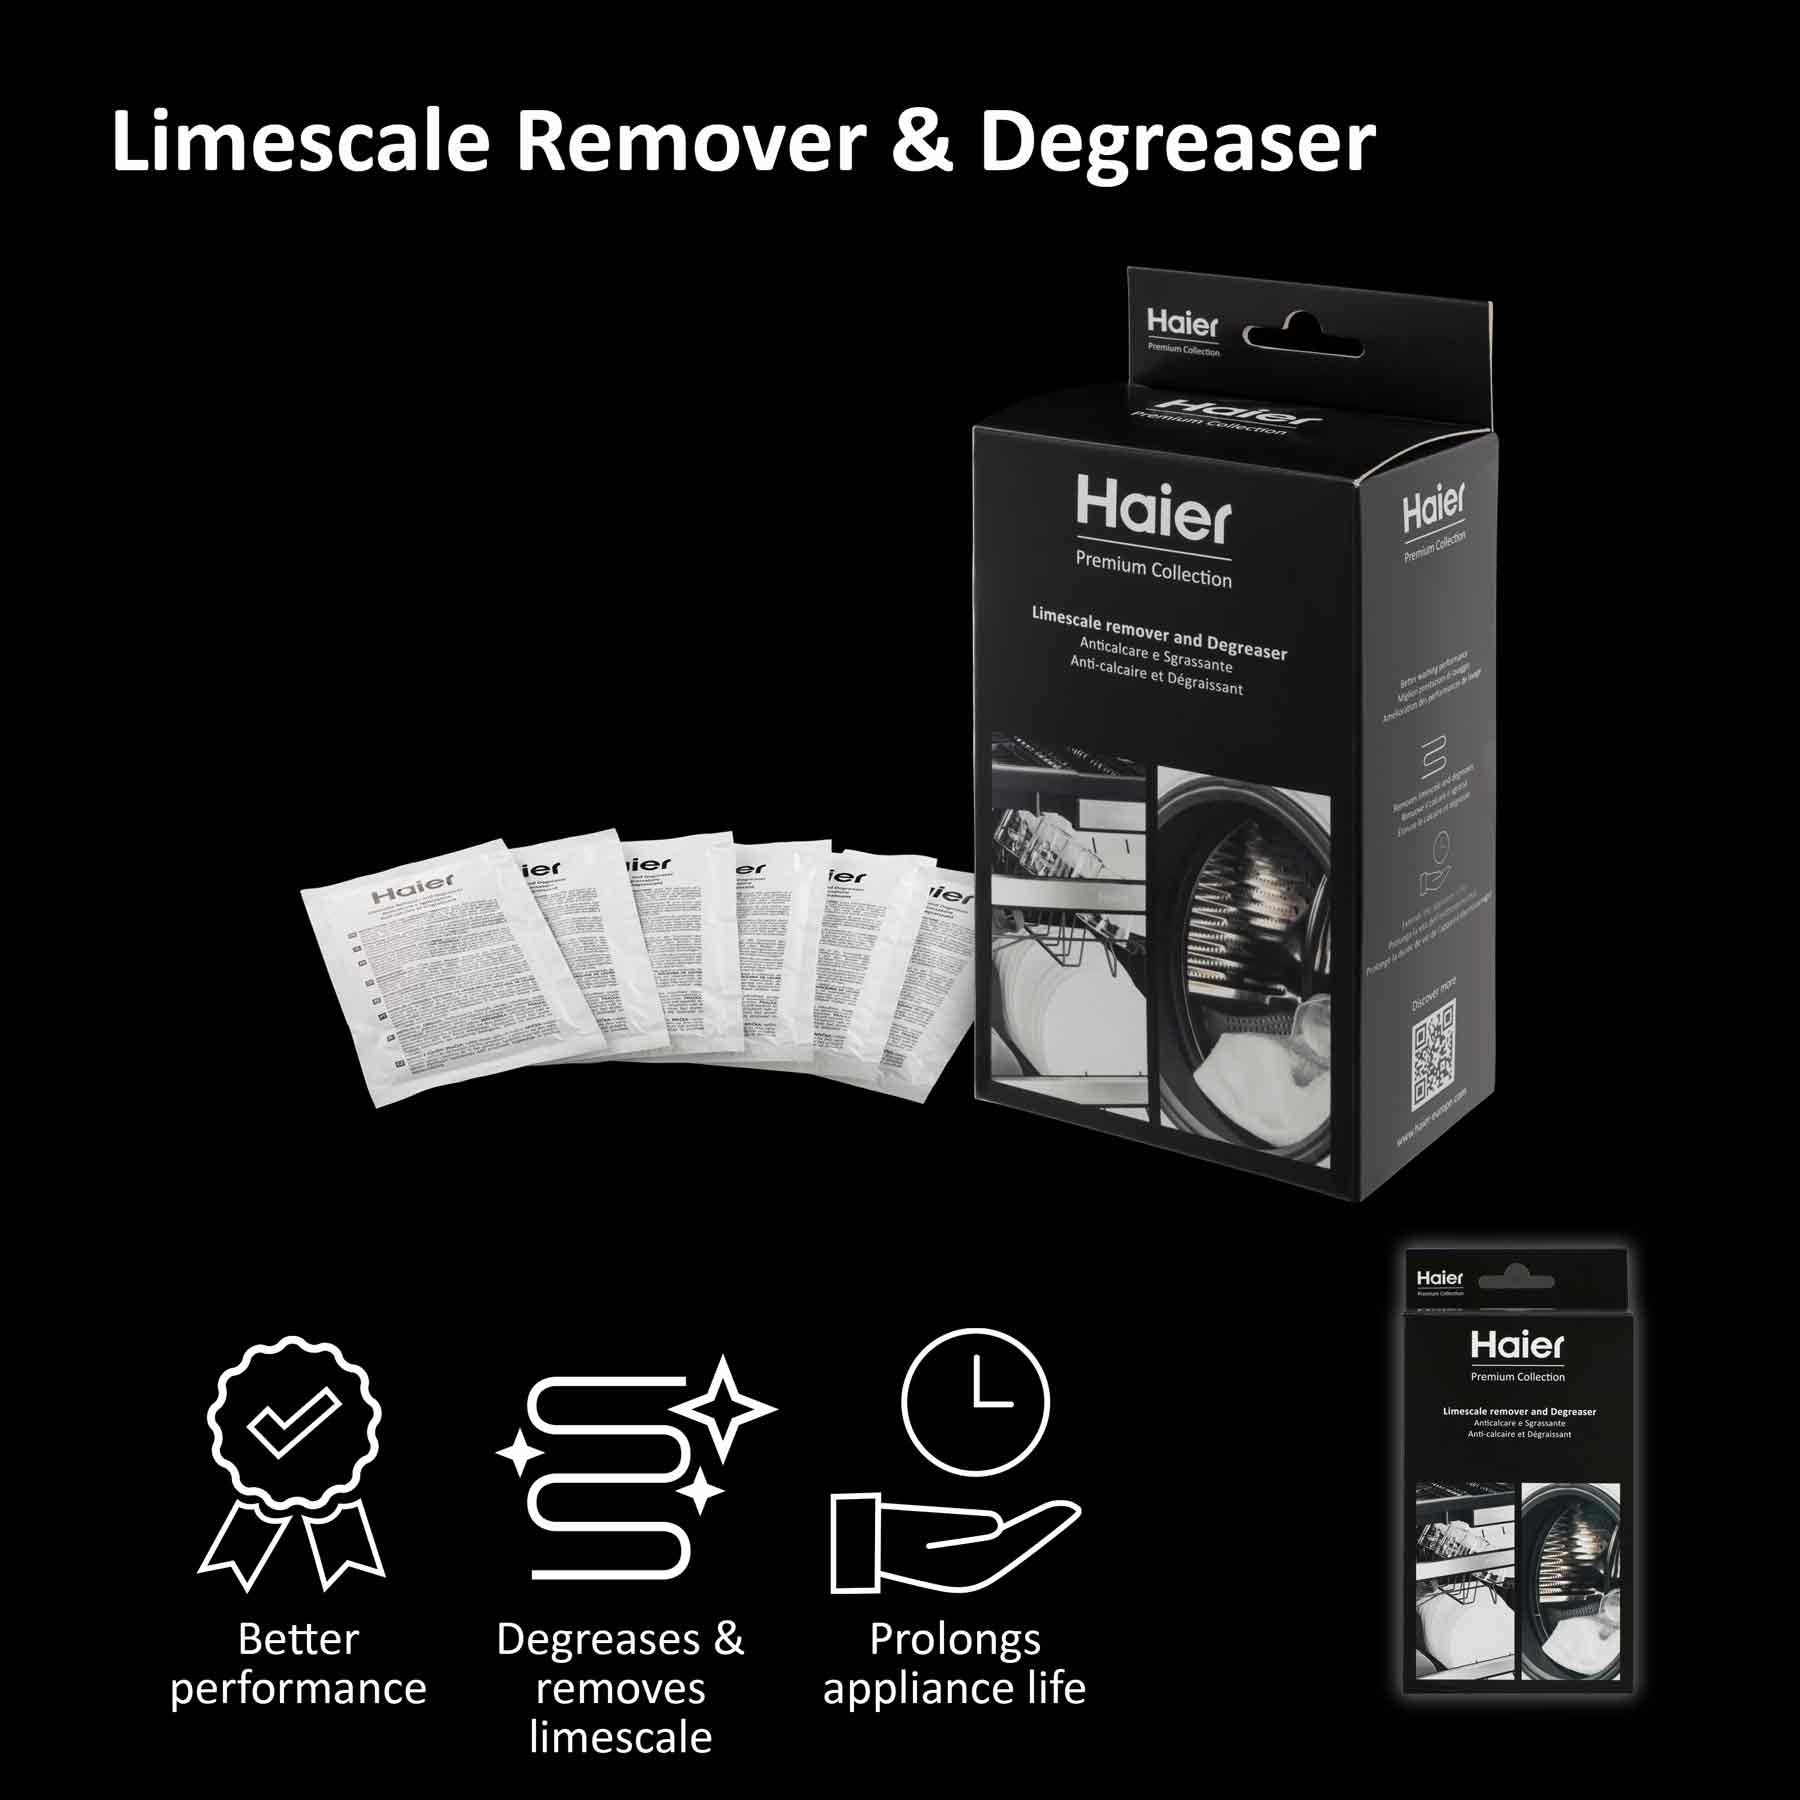 Haier, Washing machine and dishwasher limescale remover & degreaser, 6 sachets